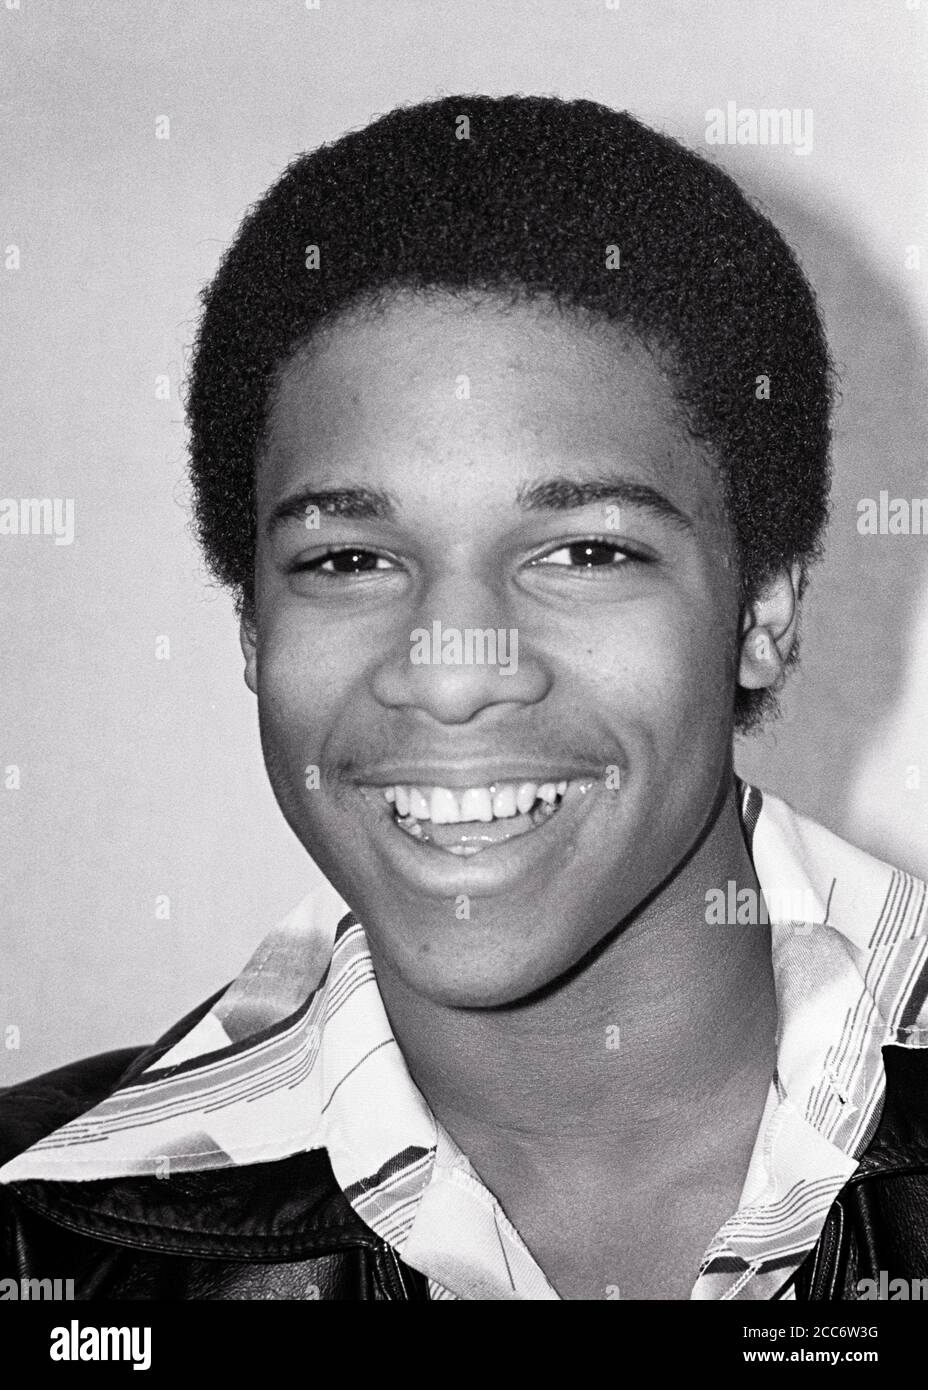 1970s 1980s PORTRAIT SMILING AFRICAN-AMERICAN TEENAGE BOY YOUNG MAN LOOKING AT CAMERA - b26020 HAR001 HARS JOY LIFESTYLE HEALTHINESS HOME LIFE COPY SPACE PERSONS MALES TEENAGE BOY CONFIDENCE EXPRESSIONS B&W WIDE EYE CONTACT HAPPINESS HEAD AND SHOULDERS CHEERFUL STYLES AFRICAN-AMERICANS AFRICAN-AMERICAN BLACK ETHNICITY PRIDE SMILES JOYFUL STYLISH TEENAGED EAGER FASHIONS GRIN GROWTH JUVENILES BLACK AND WHITE HAR001 OLD FASHIONED AFRICAN AMERICANS Stock Photo